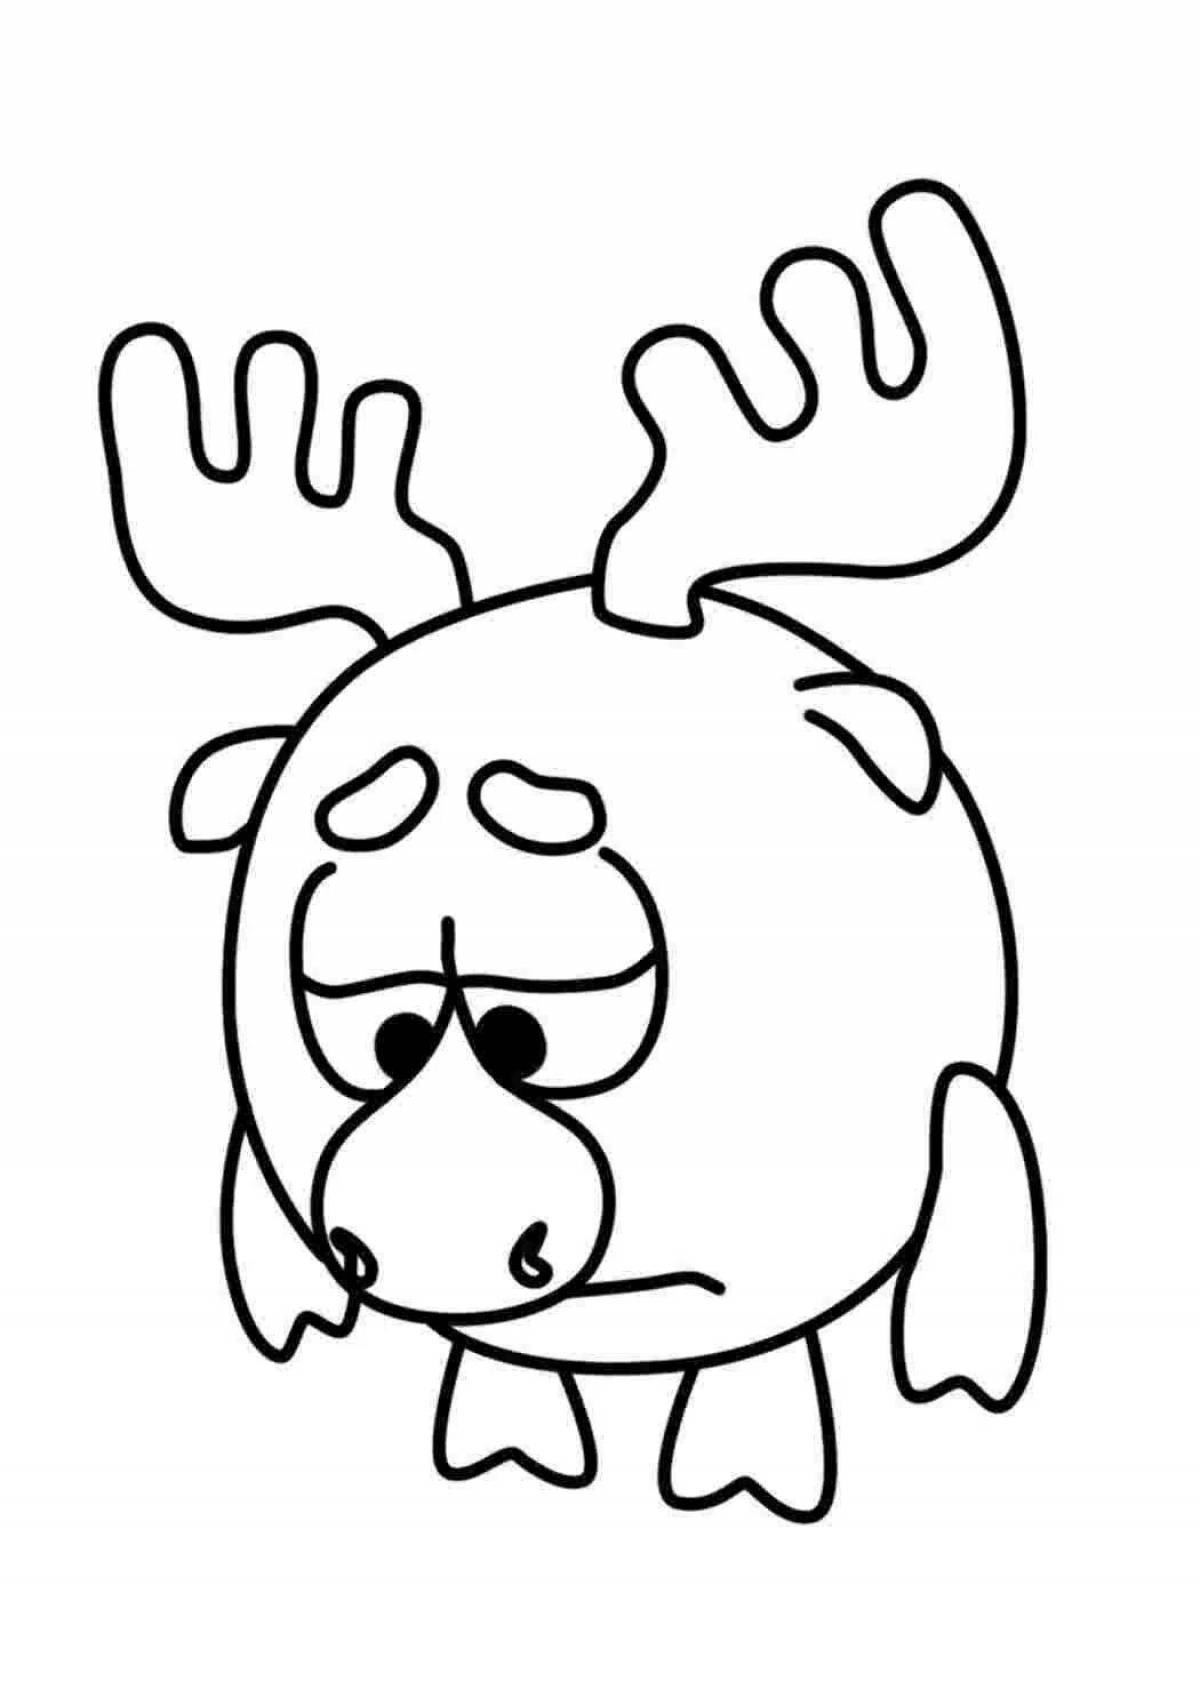 Awesome moose coloring page